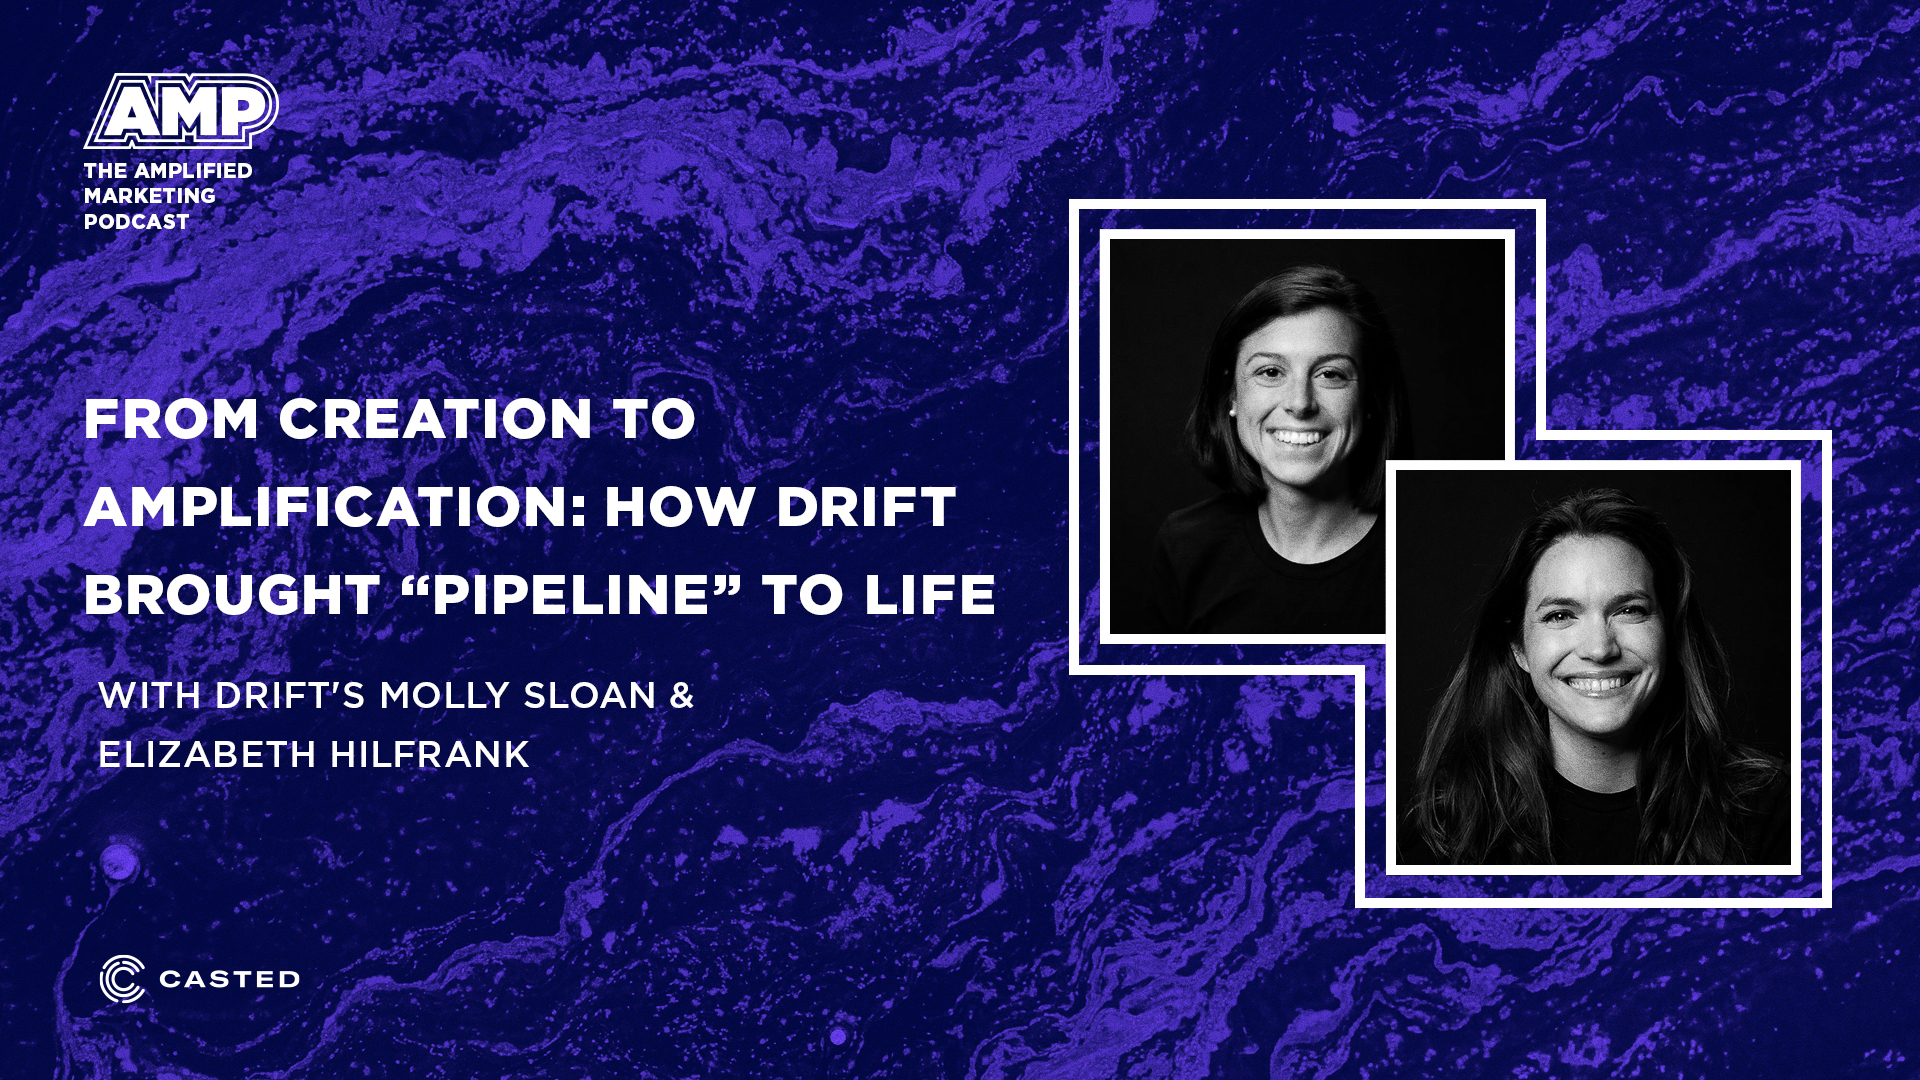 From Creation to Amplification: How Drift Brought “Pipeline” to Life with Drift's Molly Sloan and Elizabeth Hilfrank